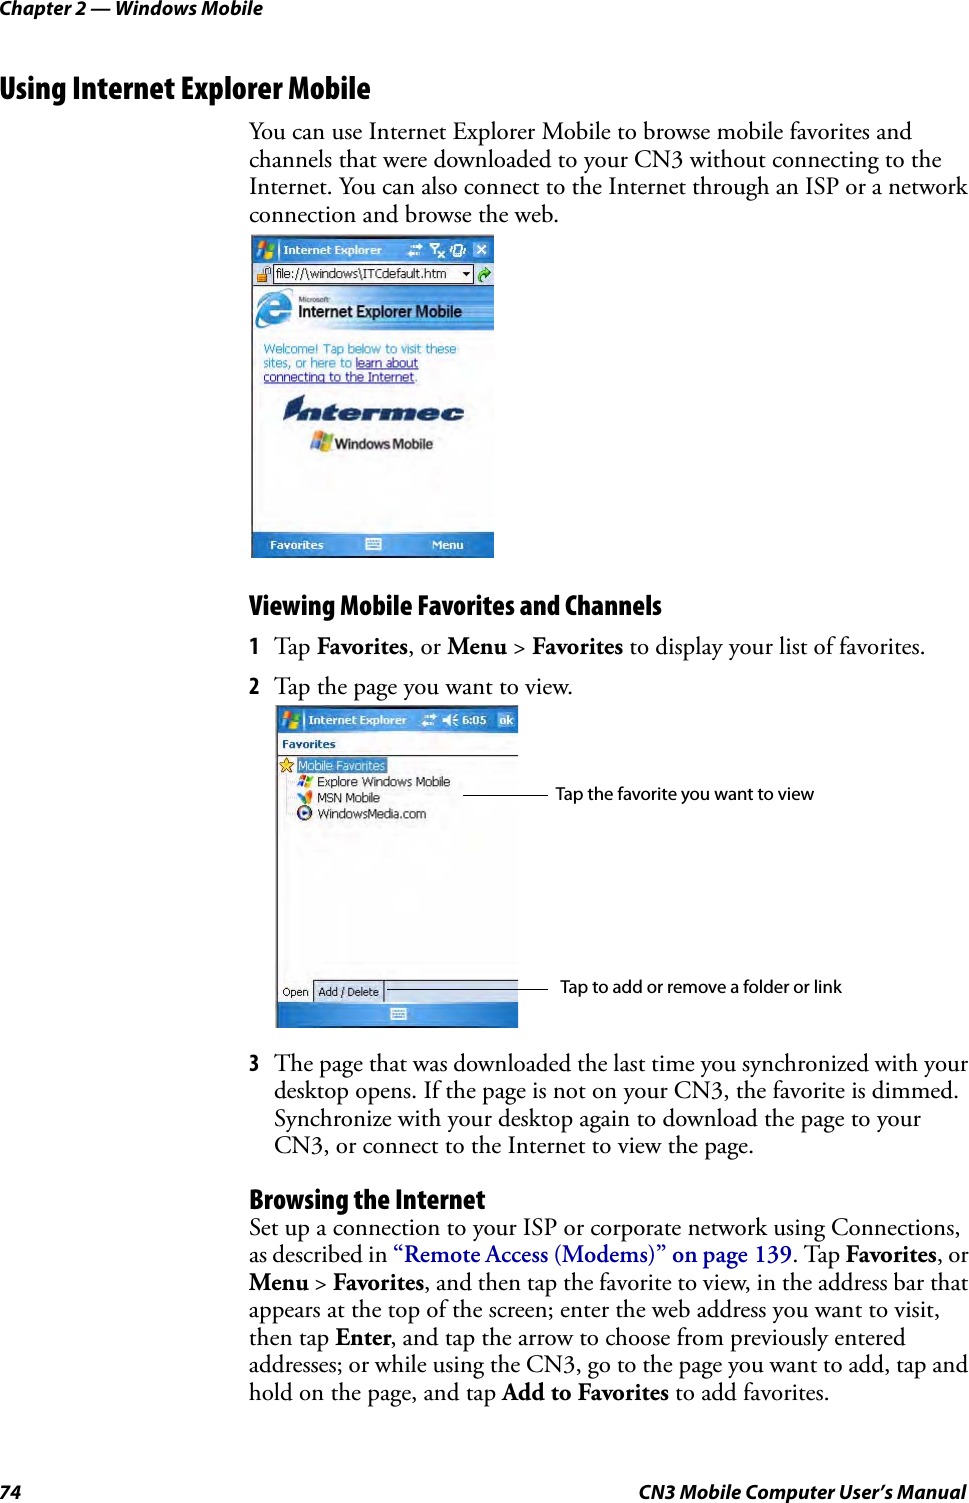 Chapter 2 — Windows Mobile74 CN3 Mobile Computer User’s ManualUsing Internet Explorer MobileYou can use Internet Explorer Mobile to browse mobile favorites and channels that were downloaded to your CN3 without connecting to the Internet. You can also connect to the Internet through an ISP or a network connection and browse the web.Viewing Mobile Favorites and Channels1Tap  Favorites, or Menu &gt; Favorites to display your list of favorites.2Tap the page you want to view.3The page that was downloaded the last time you synchronized with your desktop opens. If the page is not on your CN3, the favorite is dimmed. Synchronize with your desktop again to download the page to your CN3, or connect to the Internet to view the page.Browsing the InternetSet up a connection to your ISP or corporate network using Connections, as described in “Remote Access (Modems)” on page 139. Tap Favorites, or Menu &gt; Favorites, and then tap the favorite to view, in the address bar that appears at the top of the screen; enter the web address you want to visit, then tap Enter, and tap the arrow to choose from previously entered addresses; or while using the CN3, go to the page you want to add, tap and hold on the page, and tap Add to Favorites to add favorites.Tap the favorite you want to viewTap to add or remove a folder or link